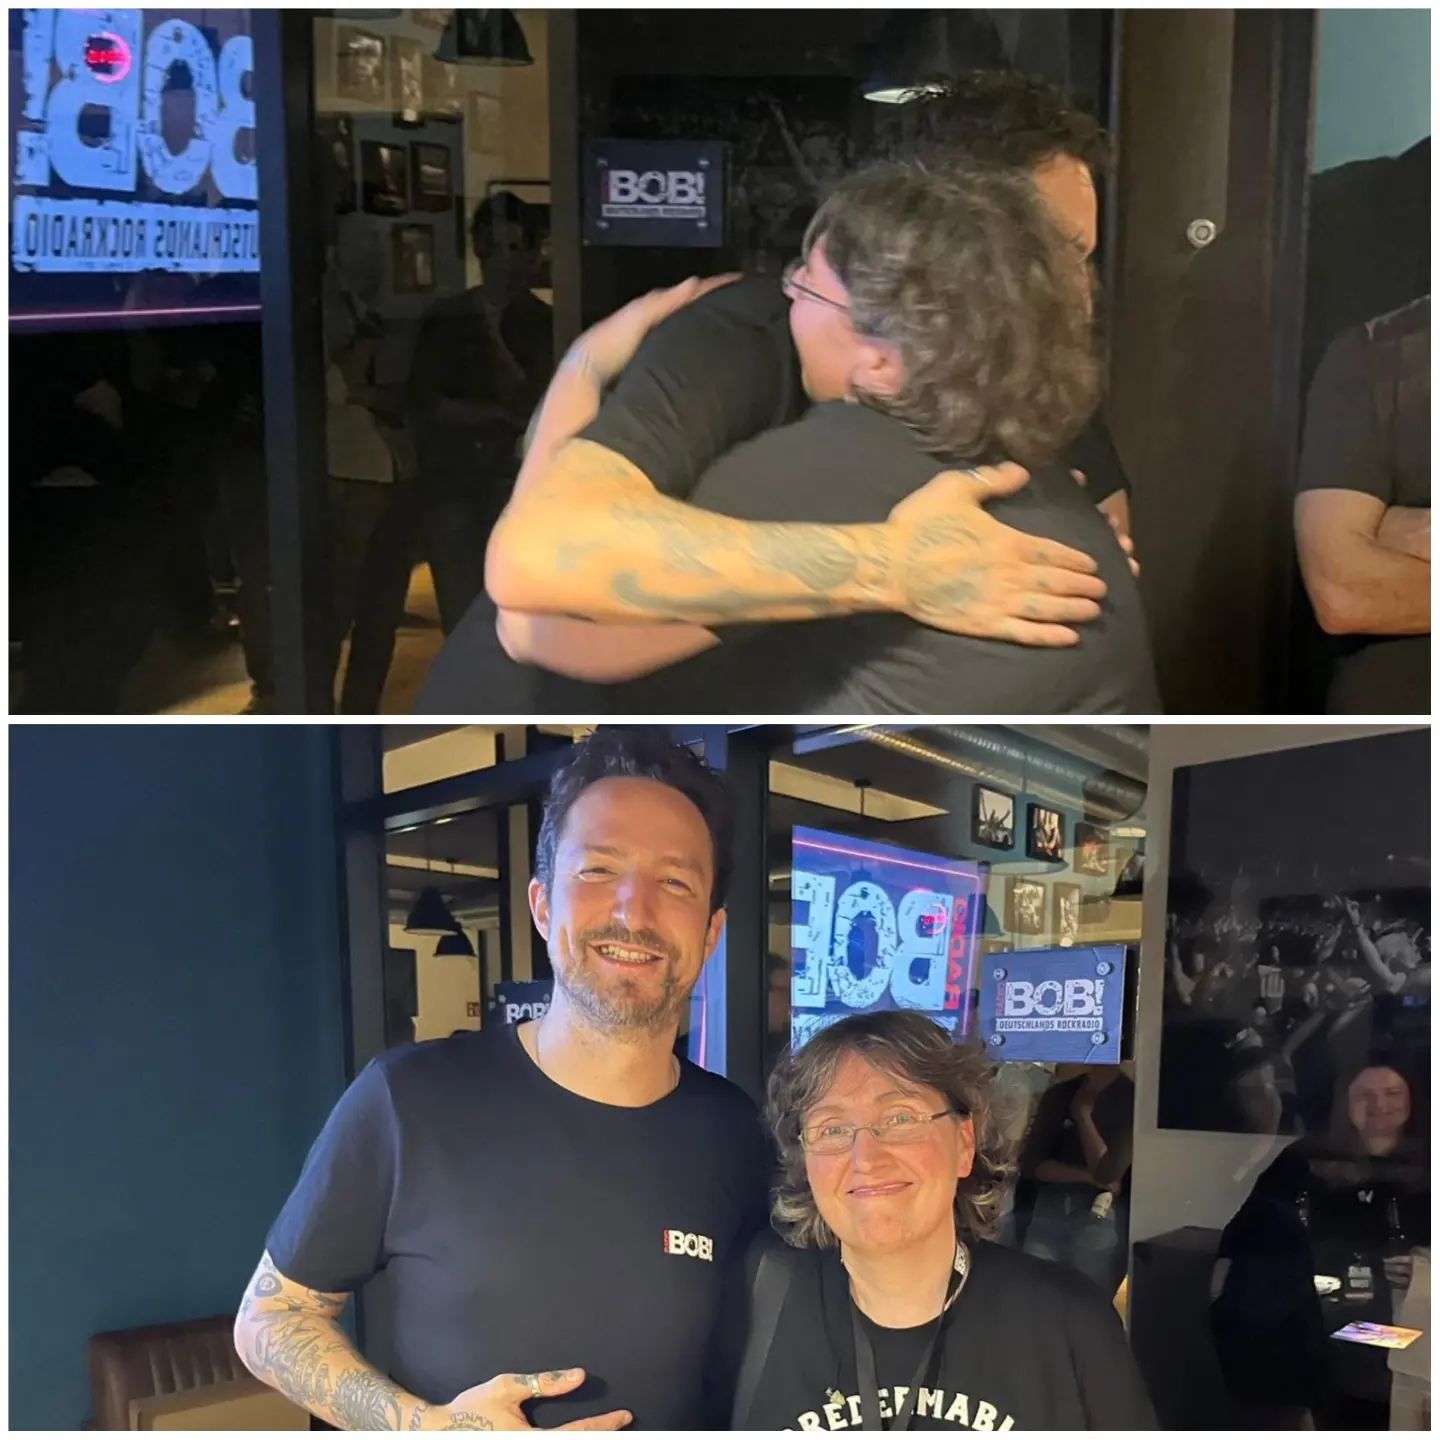 Photo of Frank hugging me and of Frank & me side by side after the gig